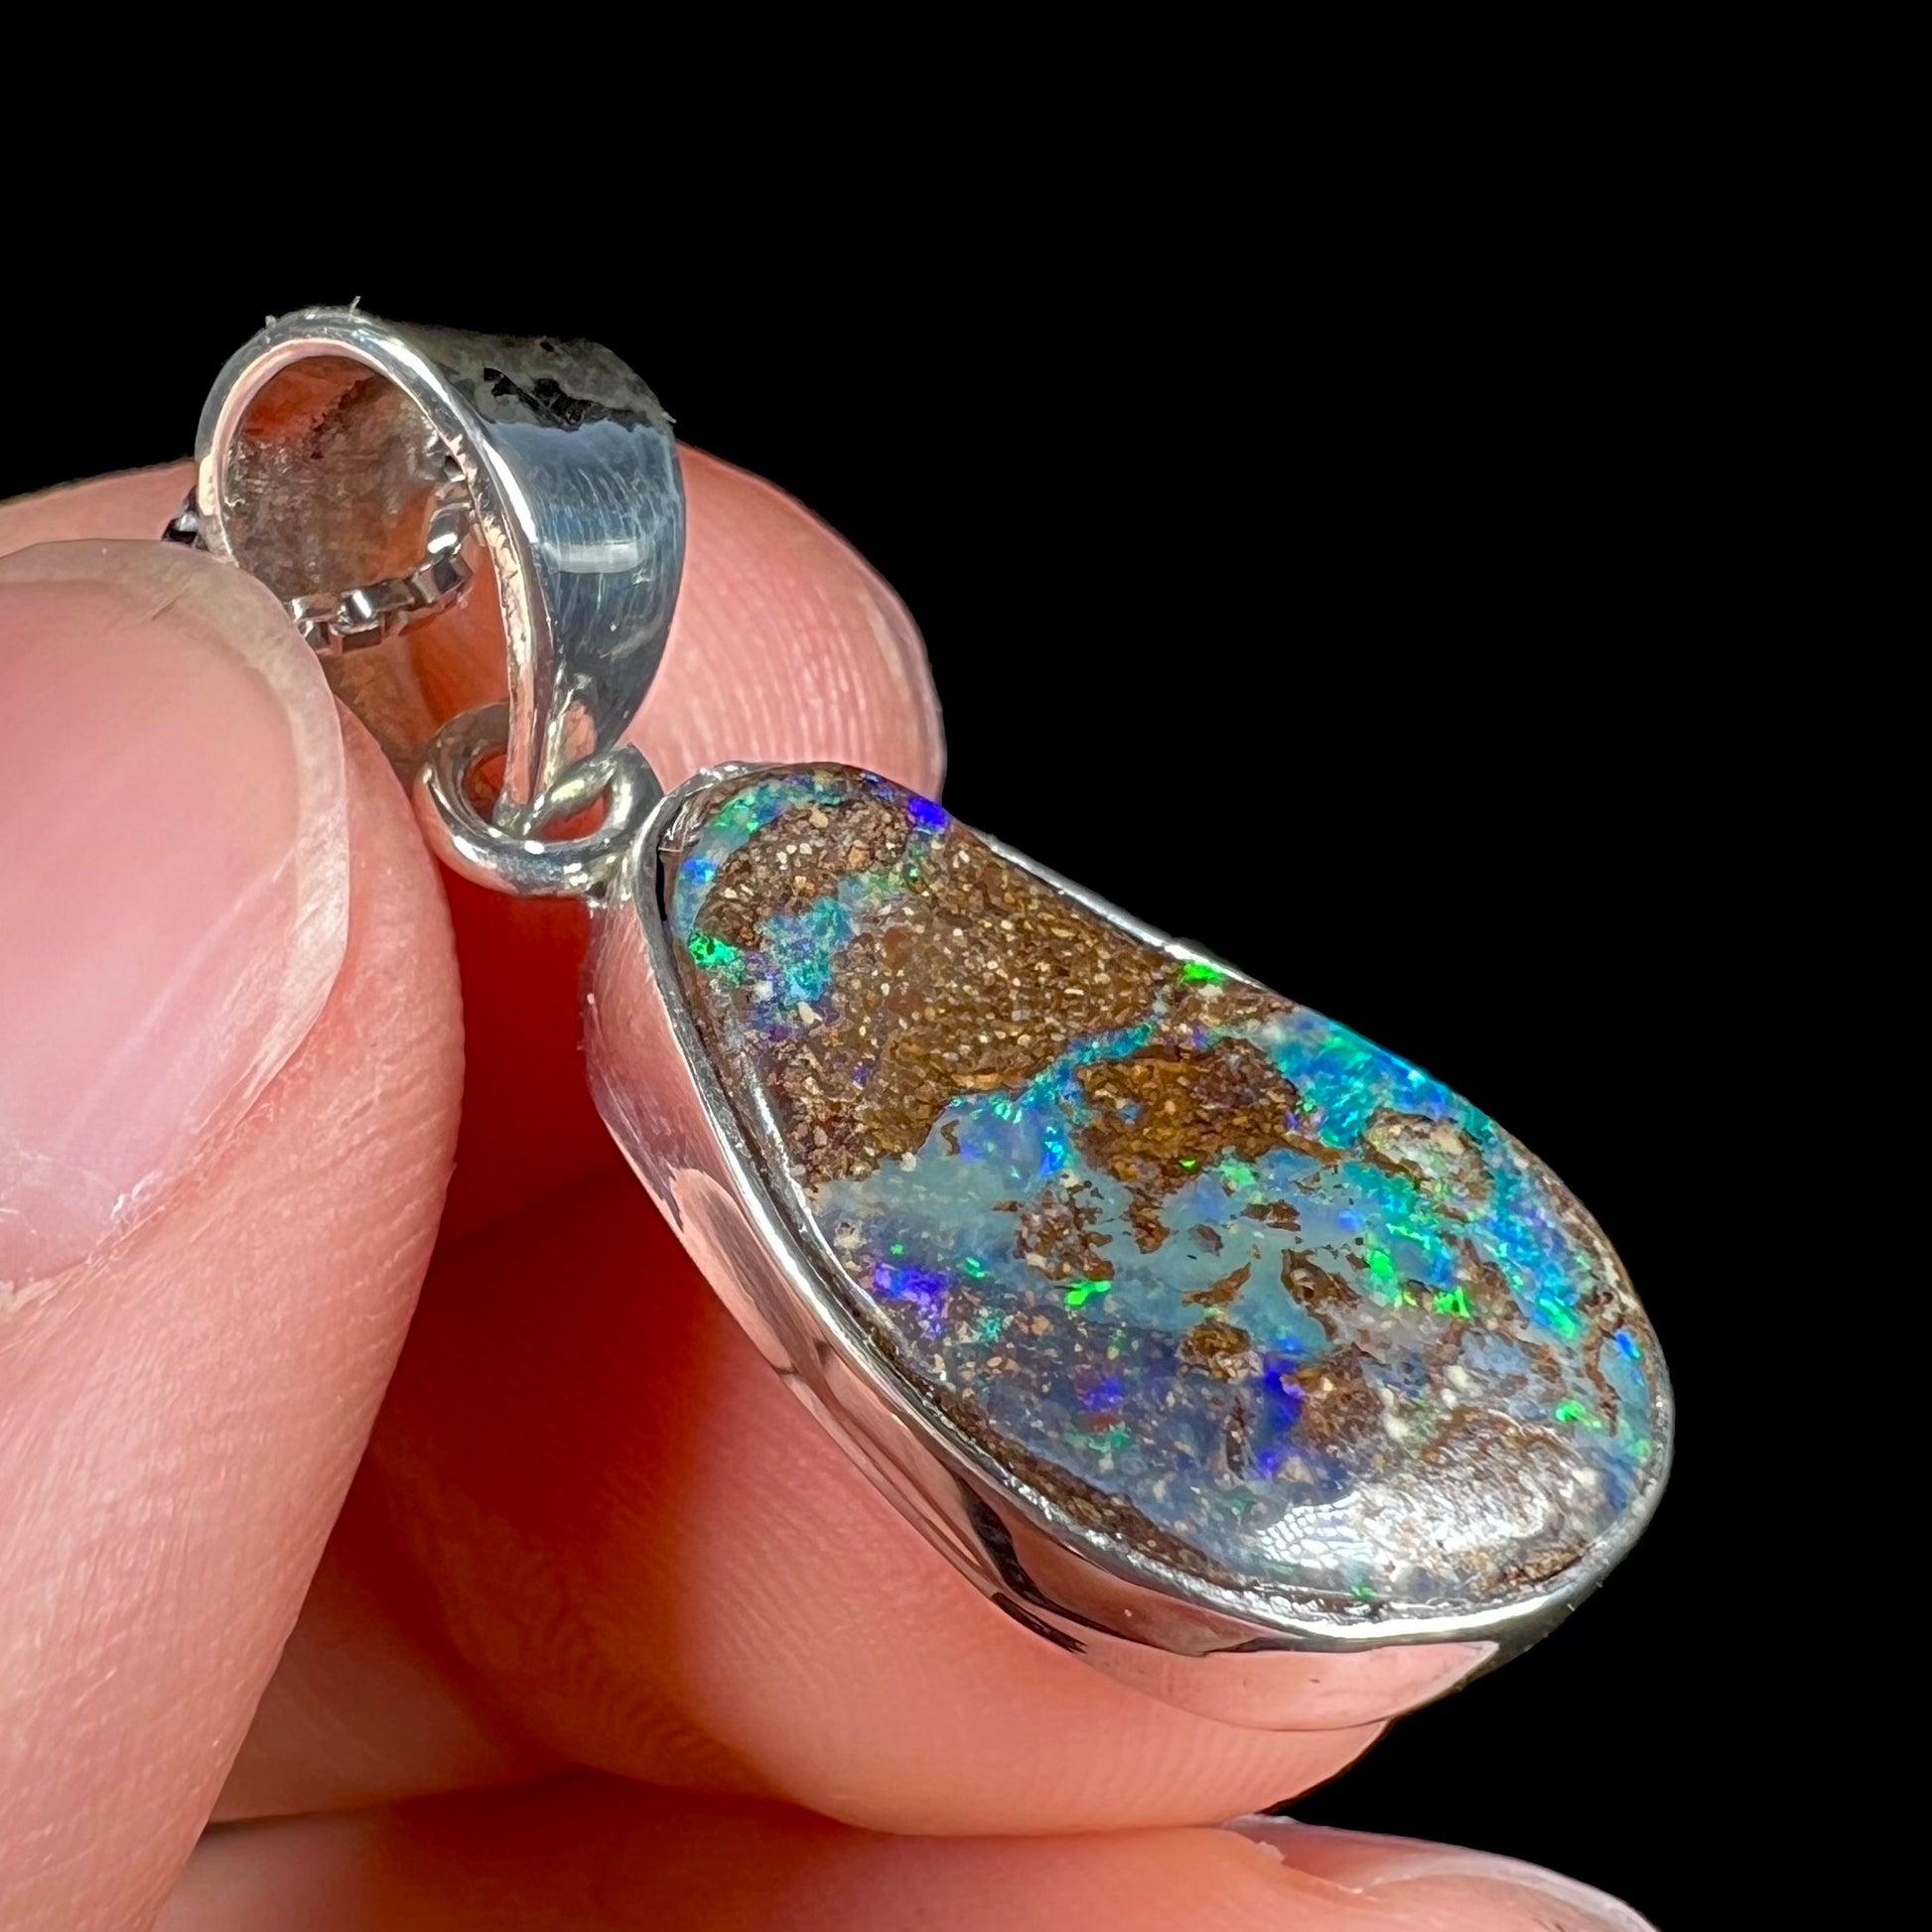 A sterling silver pendant set with an Australian boulder opal on a silver box chain.